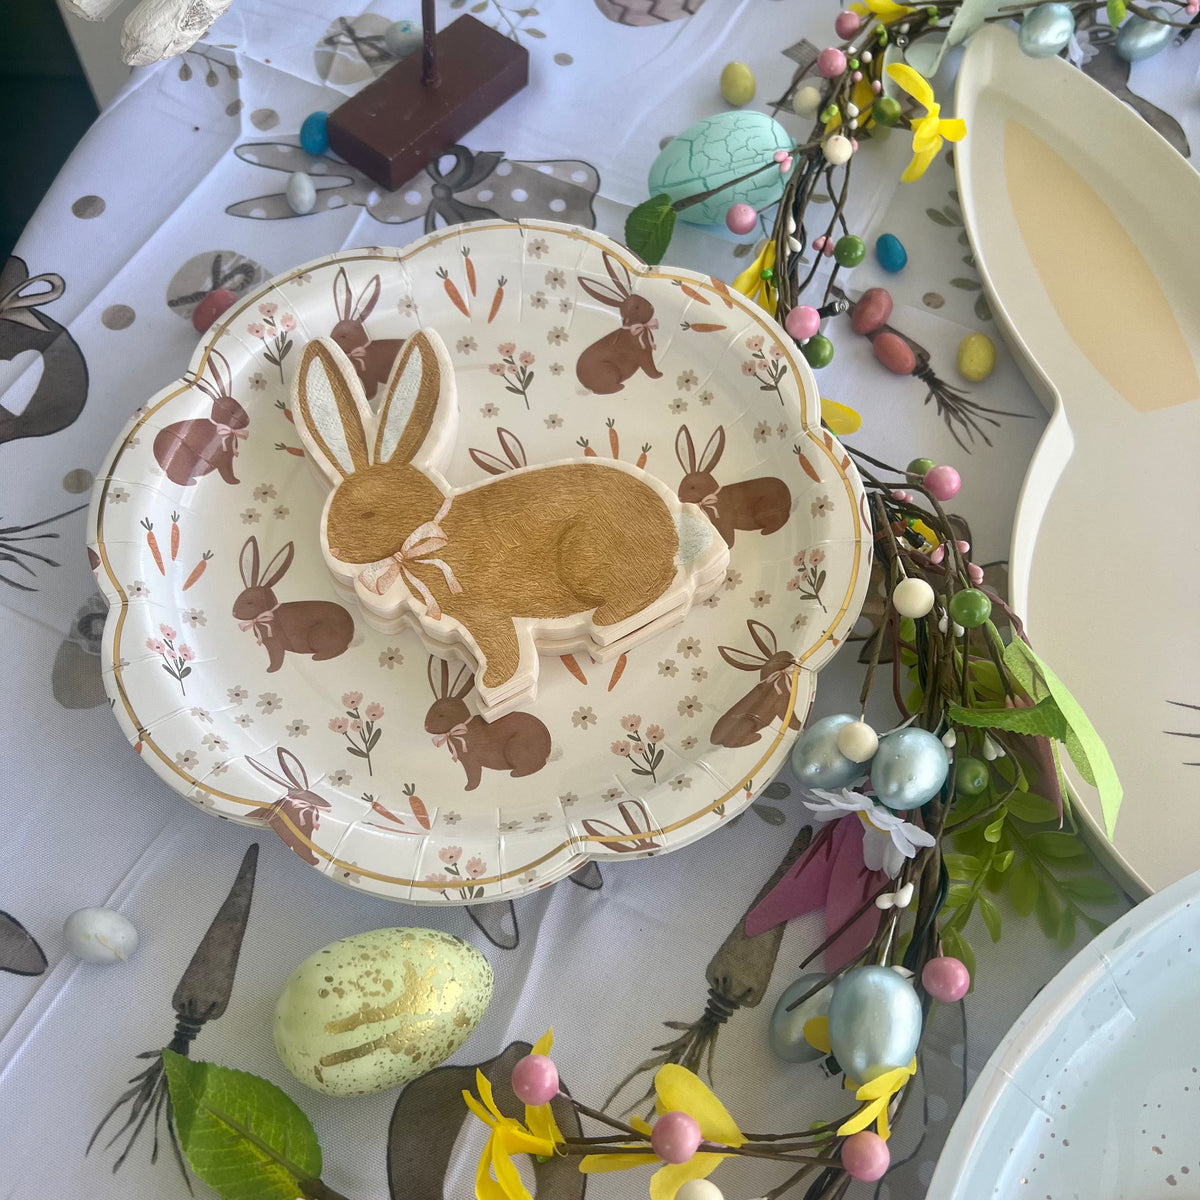 Easter Bunny Paper Plates | Easter Plates (Set of 8) - Scalloped Paper Plates - First Birthday Plates - Easter Brunch Plates - Easter Table